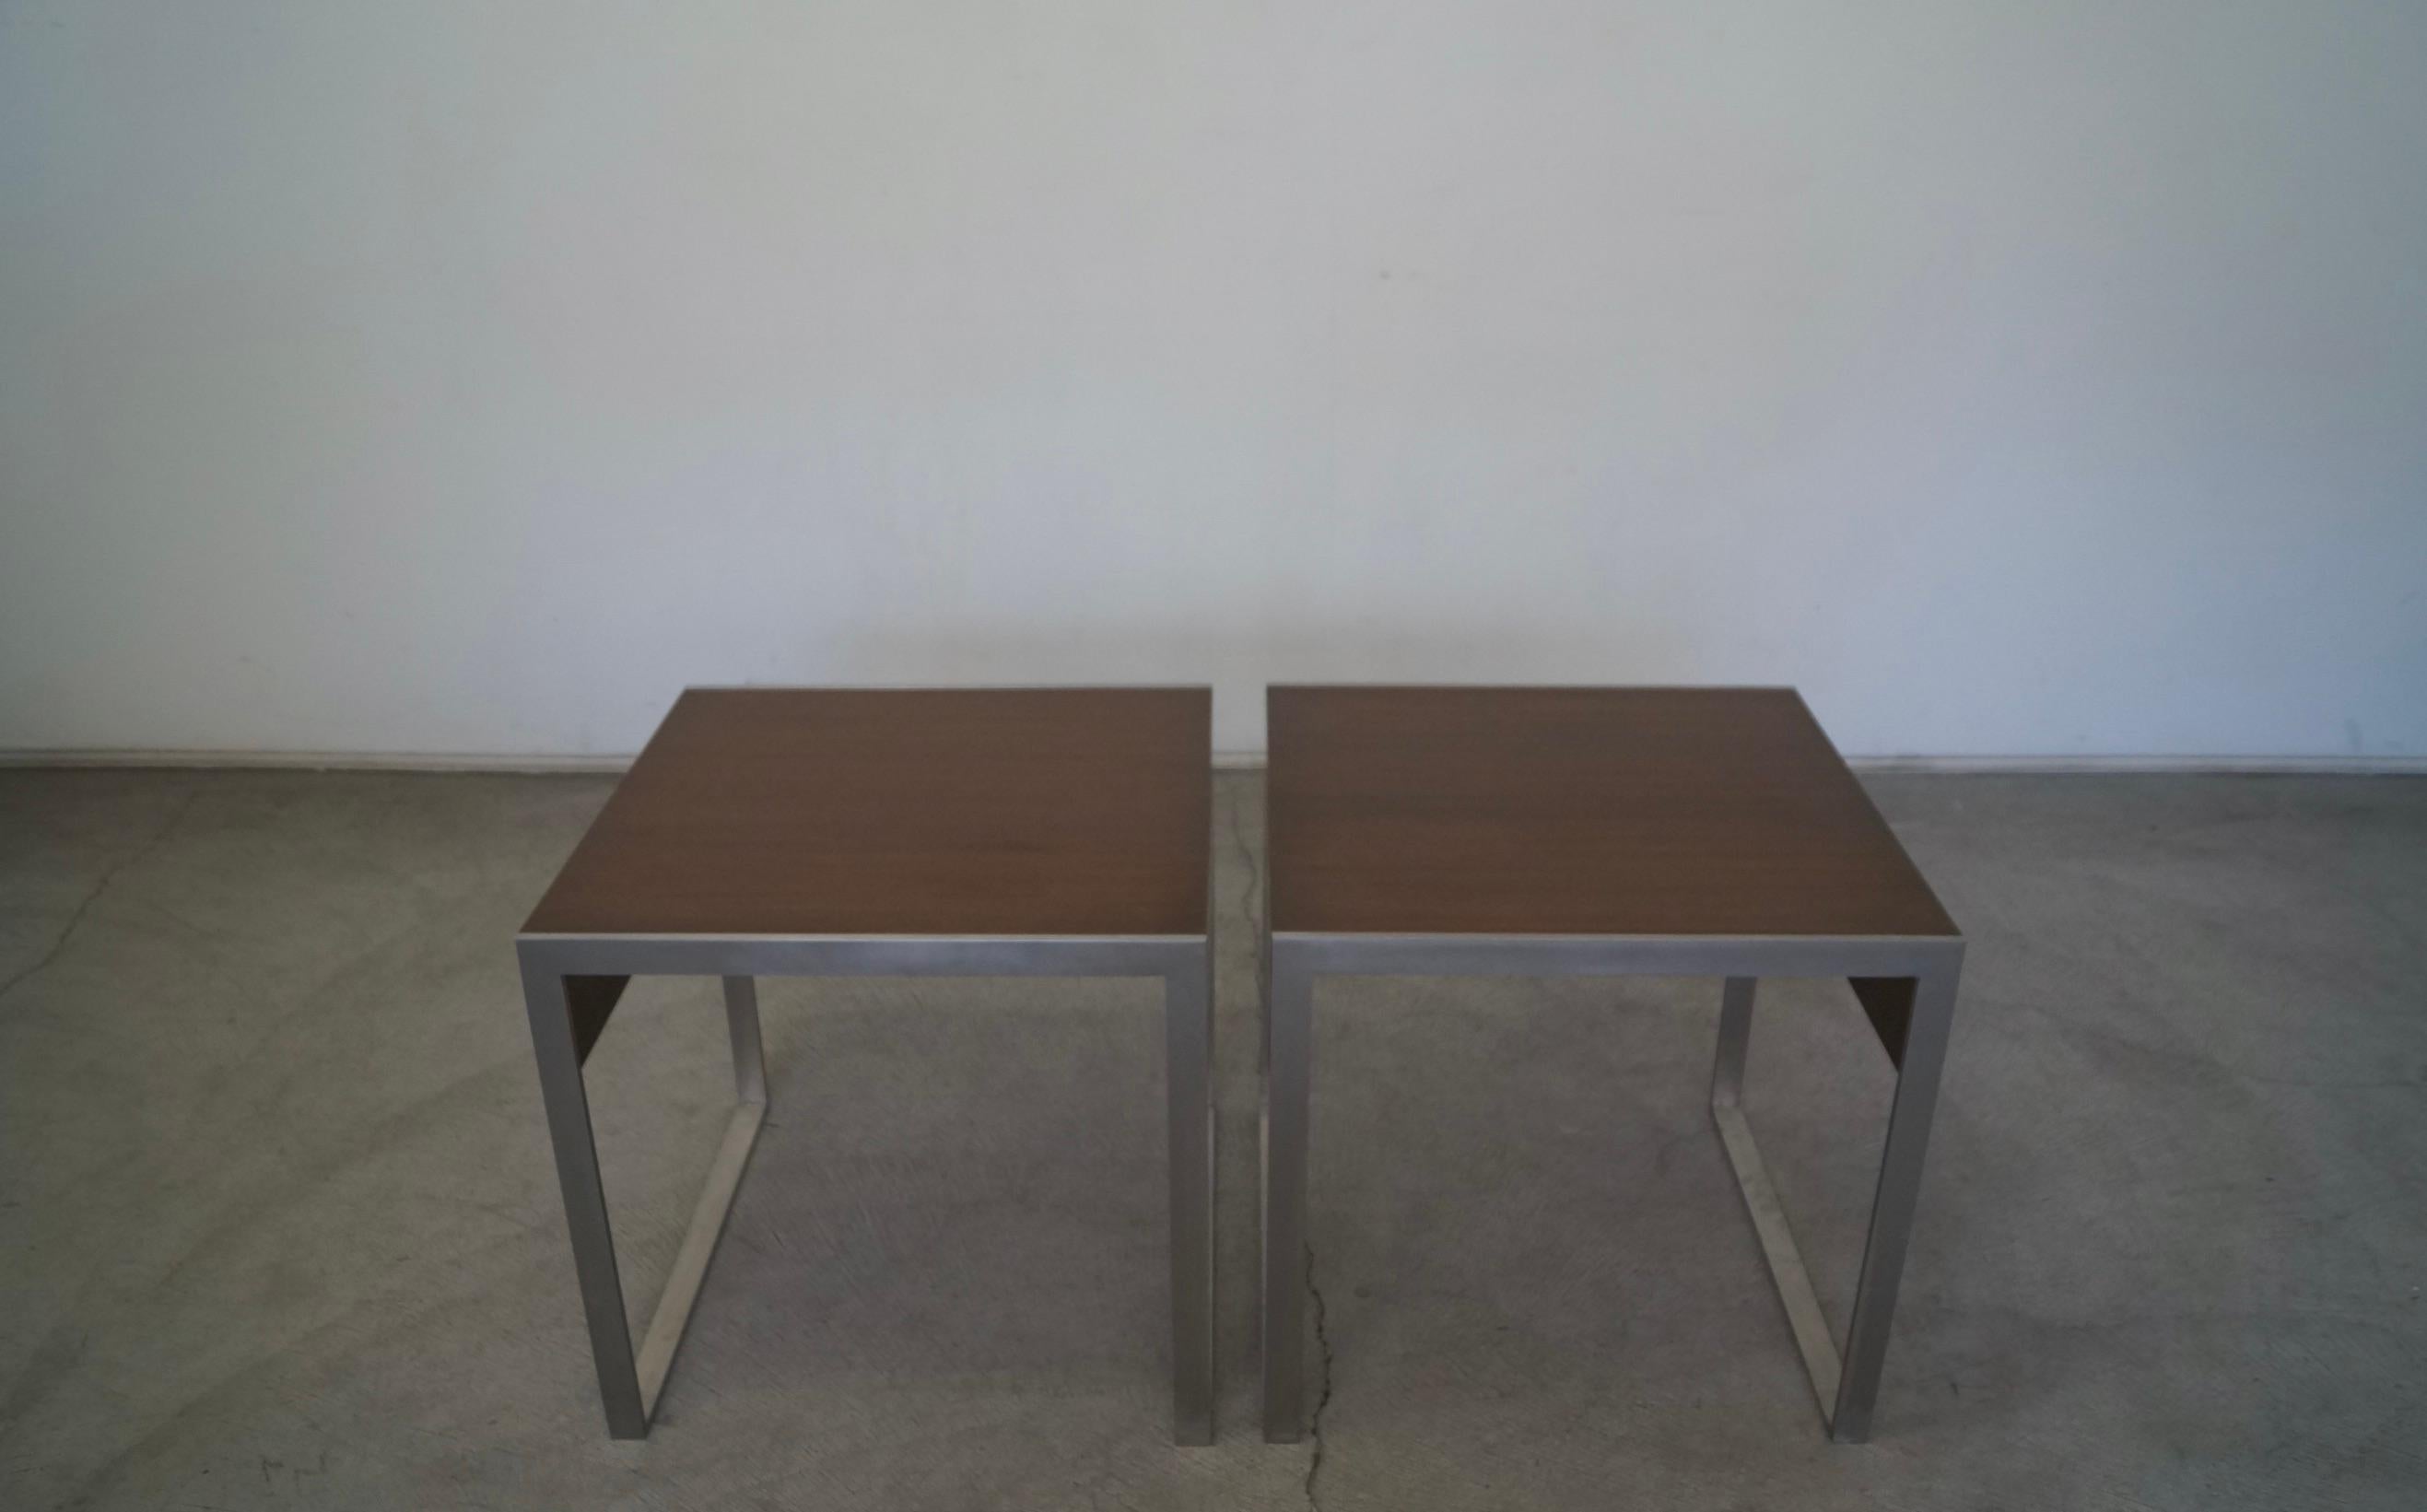 Pair of Mid-Century Modern style side tables for sale. Manufactured by high-end furniture company Bernhardt Furniture, and made here in the US. These have been professionally refinished in walnut. Very solid and well made tables with a solid